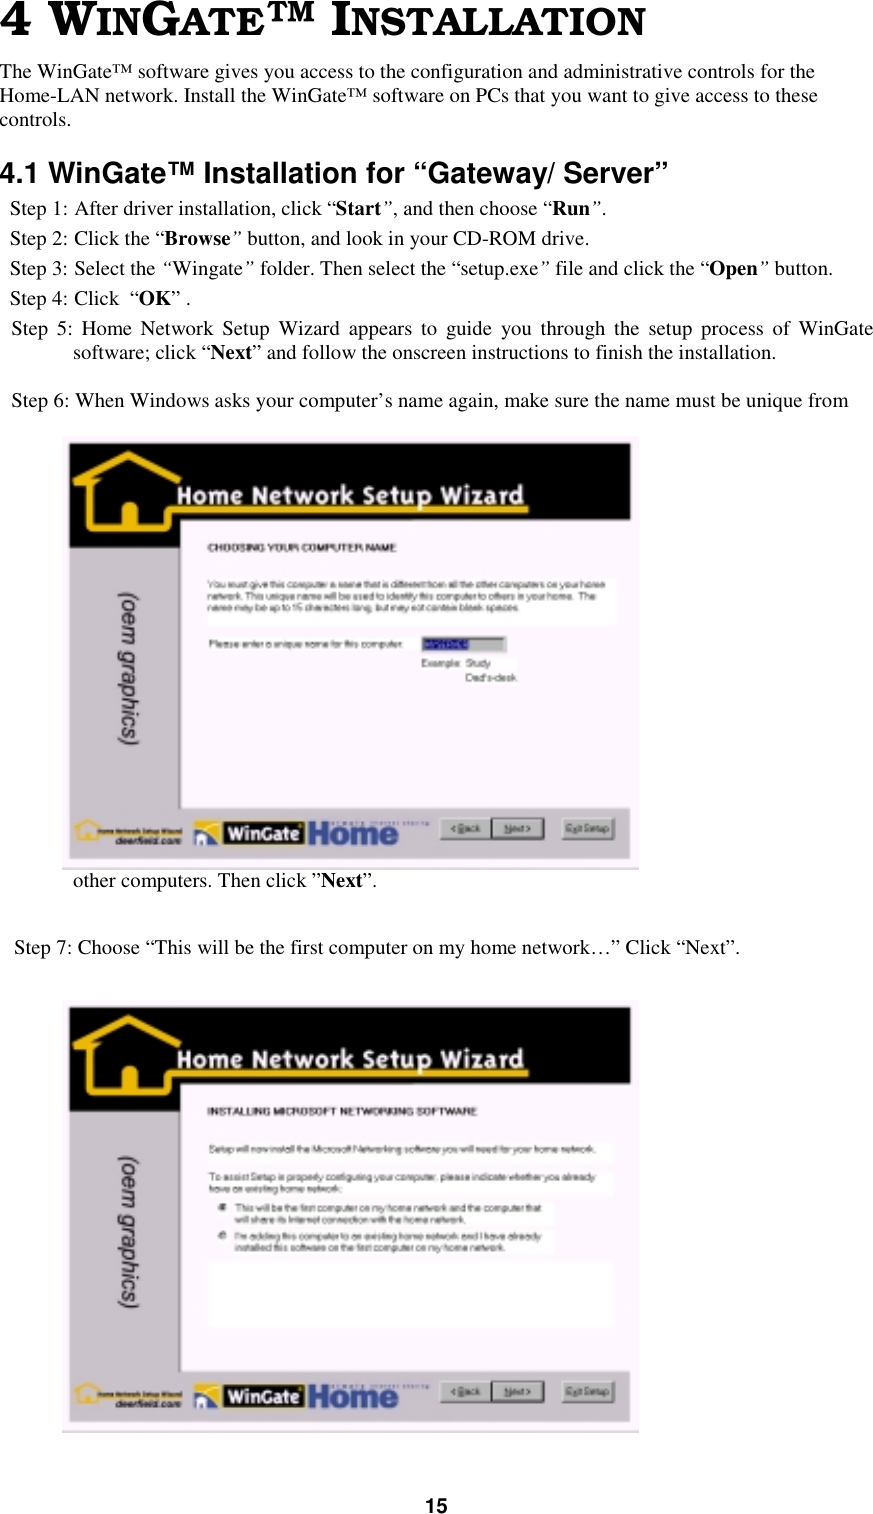 154 WINGATE™ INSTALLATIONThe WinGate™ software gives you access to the configuration and administrative controls for theHome-LAN network. Install the WinGate™ software on PCs that you want to give access to thesecontrols.4.1 WinGate™ Installation for “Gateway/ Server”Step 1: After driver installation, click “Start”, and then choose “Run”.Step 2: Click the “Browse” button, and look in your CD-ROM drive.Step 3: Select the “Wingate” folder. Then select the “setup.exe” file and click the “Open” button.Step 4: Click  “OK” .Step 5: Home Network Setup Wizard appears to guide you through the setup process of WinGatesoftware; click “Next” and follow the onscreen instructions to finish the installation.Step 6: When Windows asks your computer’s name again, make sure the name must be unique fromother computers. Then click ”Next”.Step 7: Choose “This will be the first computer on my home network…” Click “Next”.